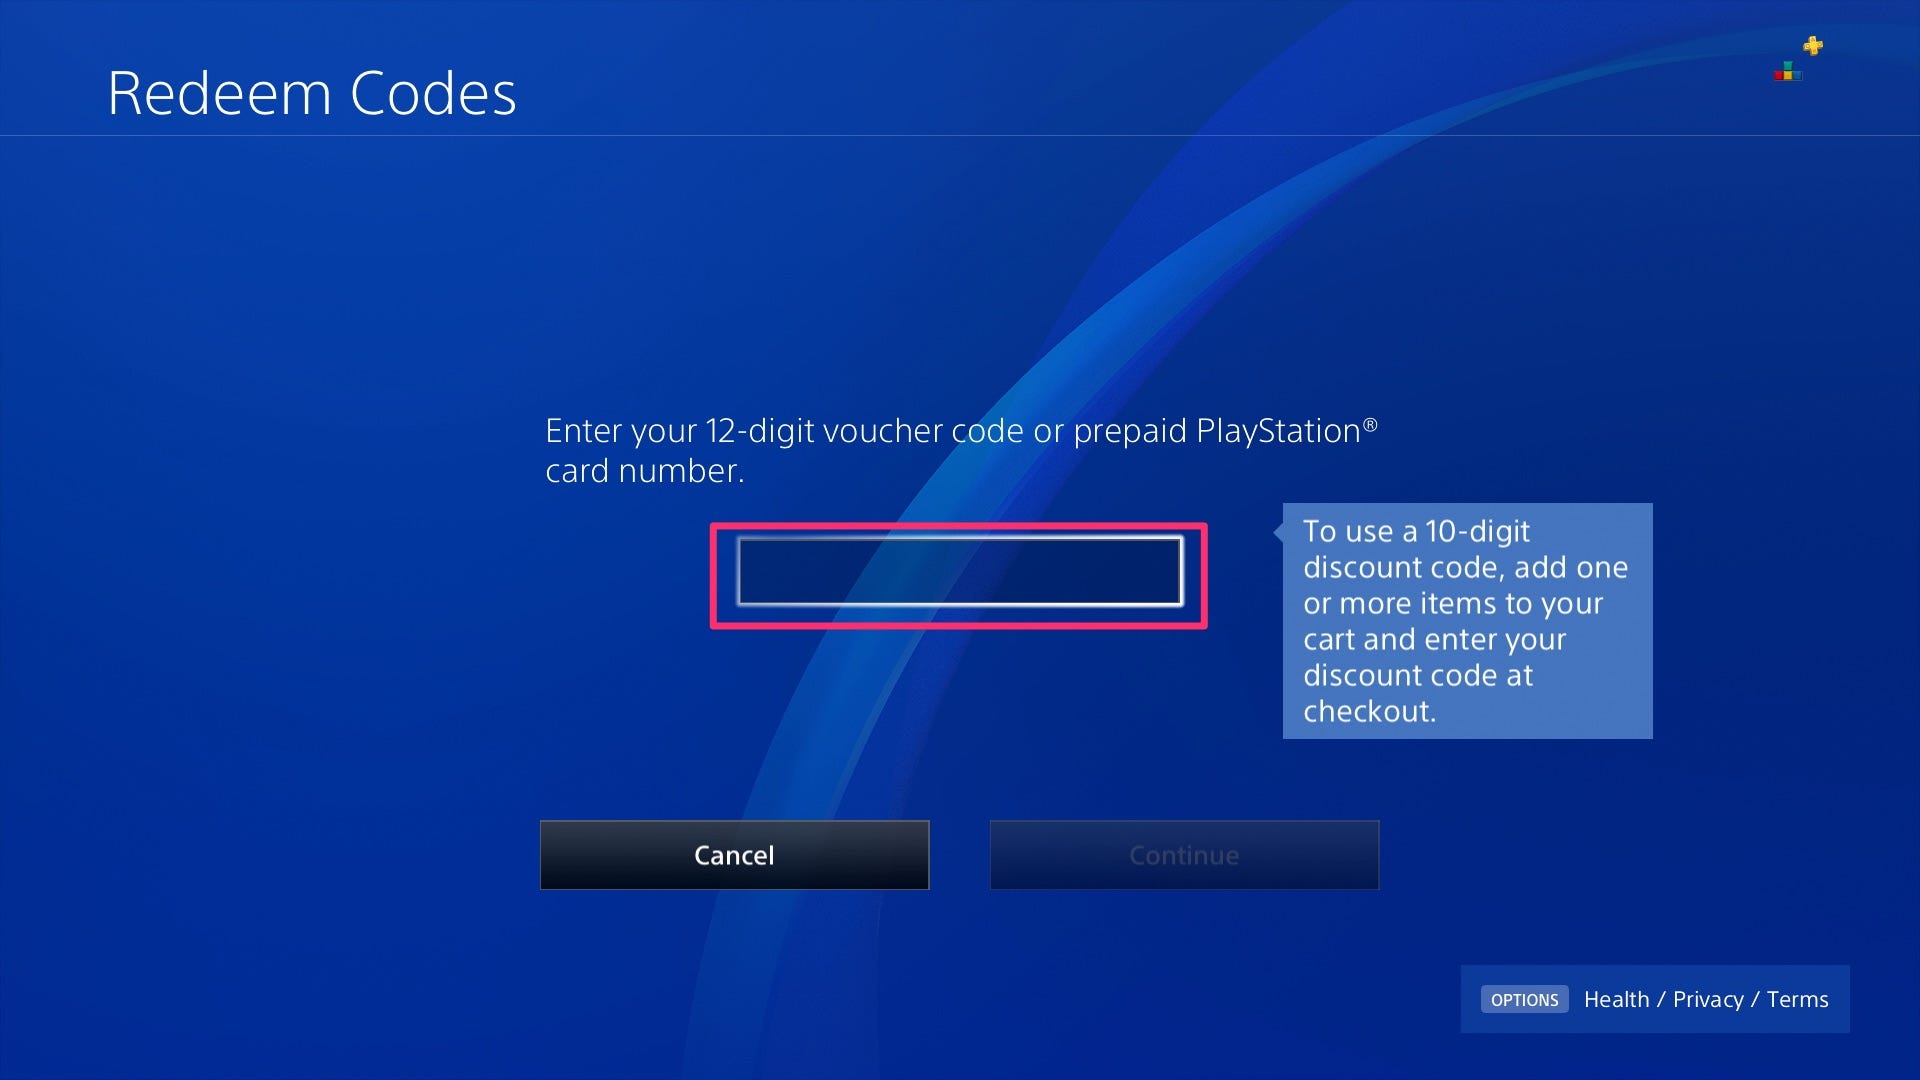 How to redeem code on PS4